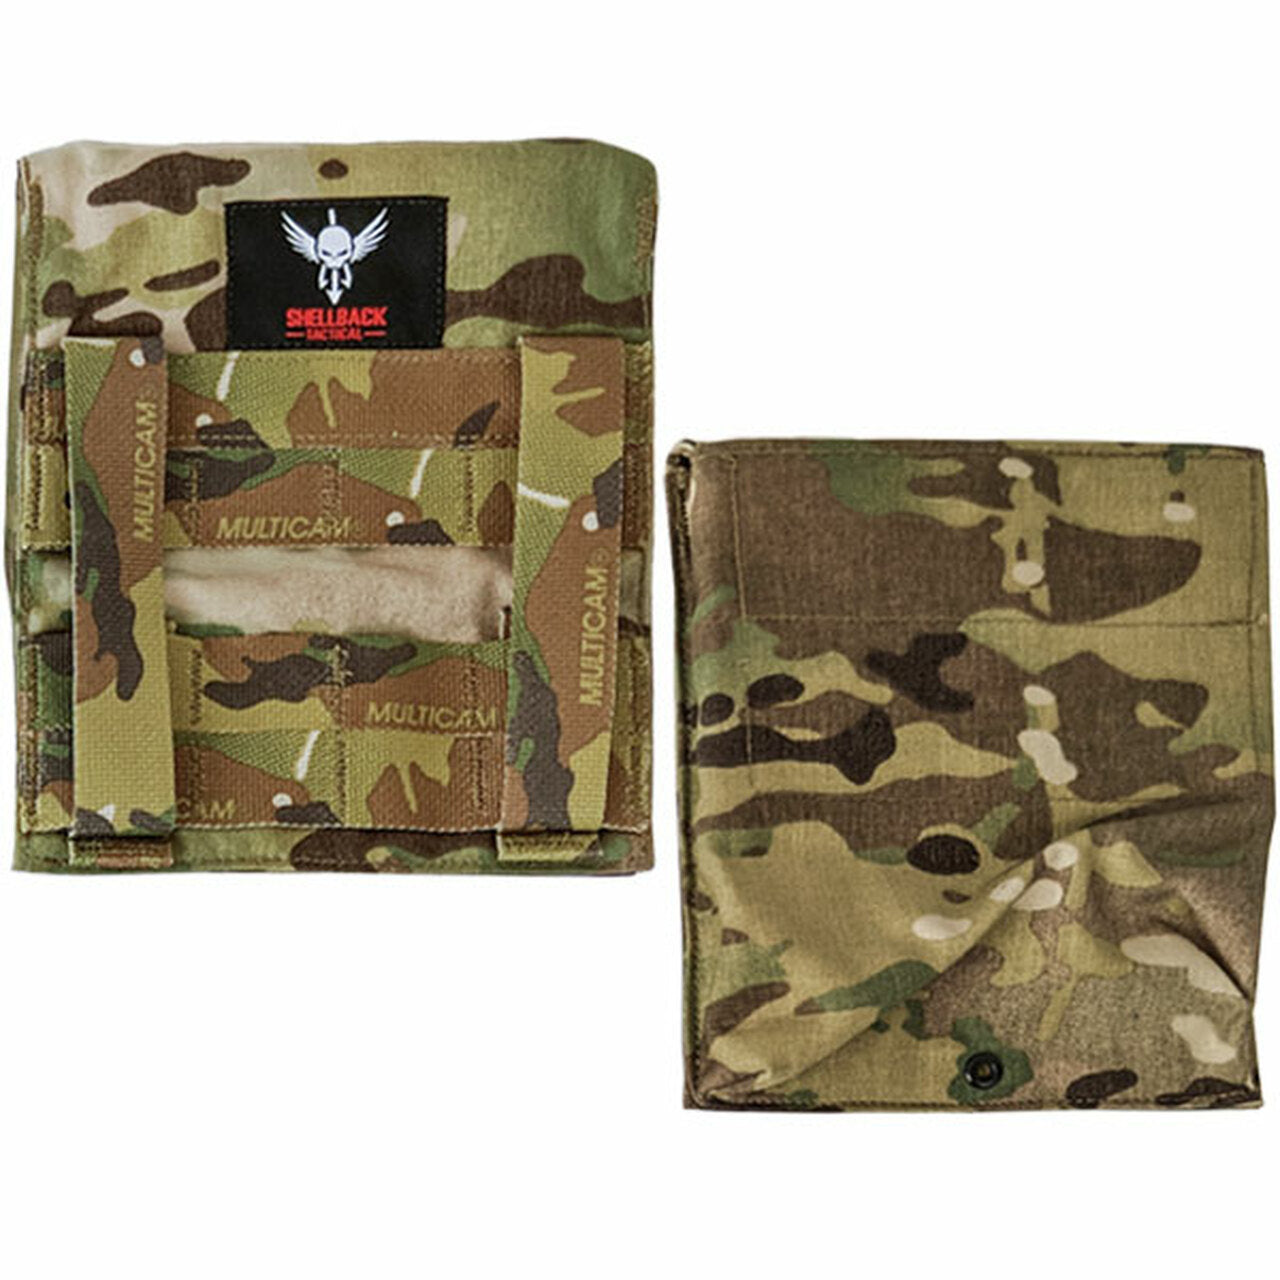 A Shellback Tactical Side Plate Pockets 2.0 - Set of 2 with a pocket on it.